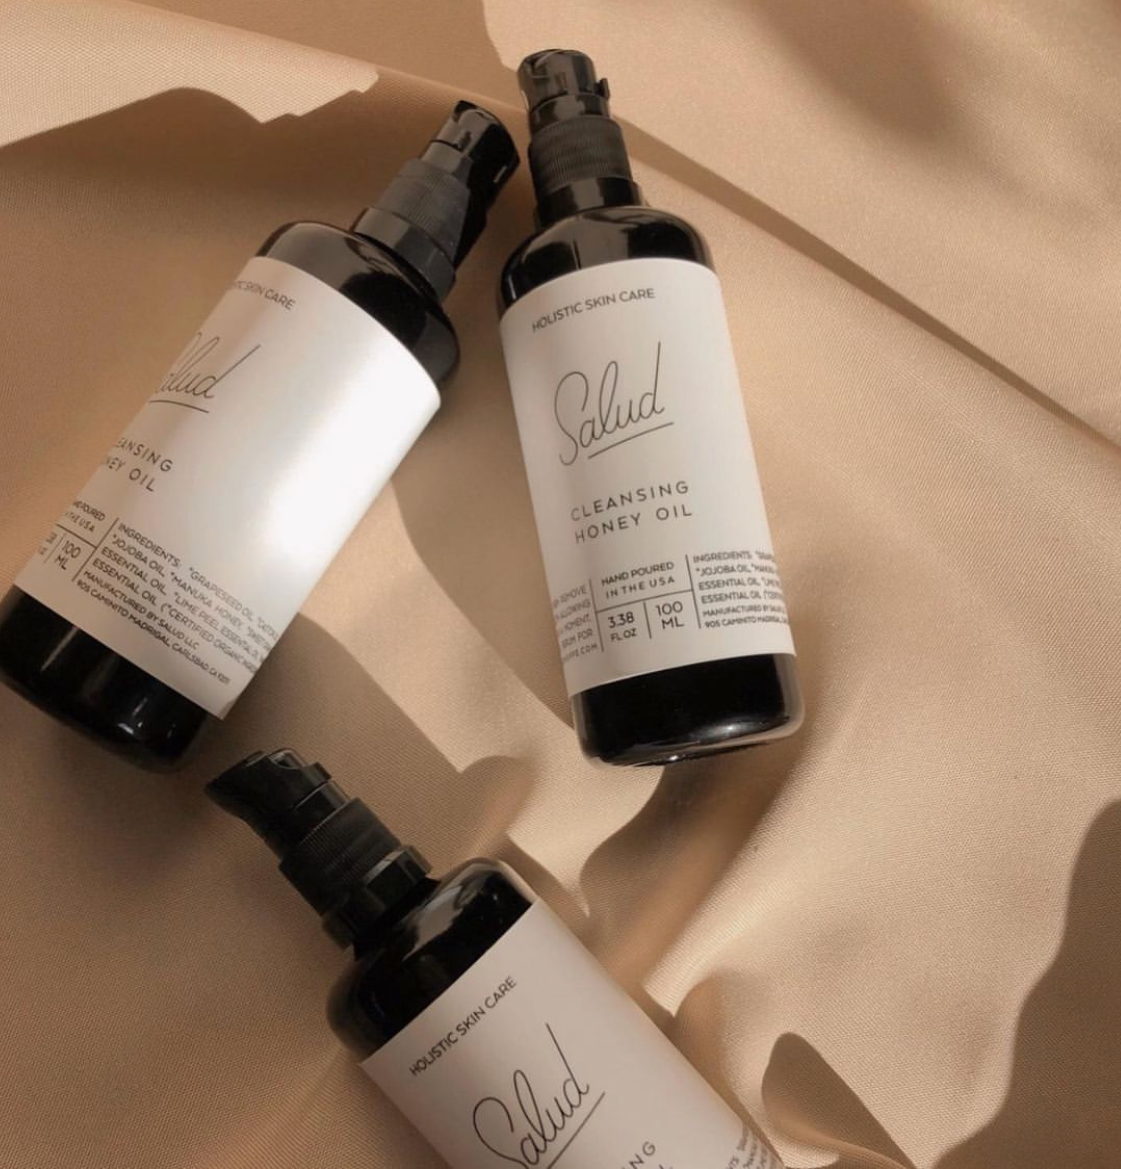 Salud Shoppe's Cleansing Honey Oil - Skin needs a gentle and effective approach, especially when you feel like your skin is out of balance. Organic manuka honey is known for it's cleansing properties and is the key ingredient in making our Cleansing Honey Oil, suitable for all skin types, even oily.